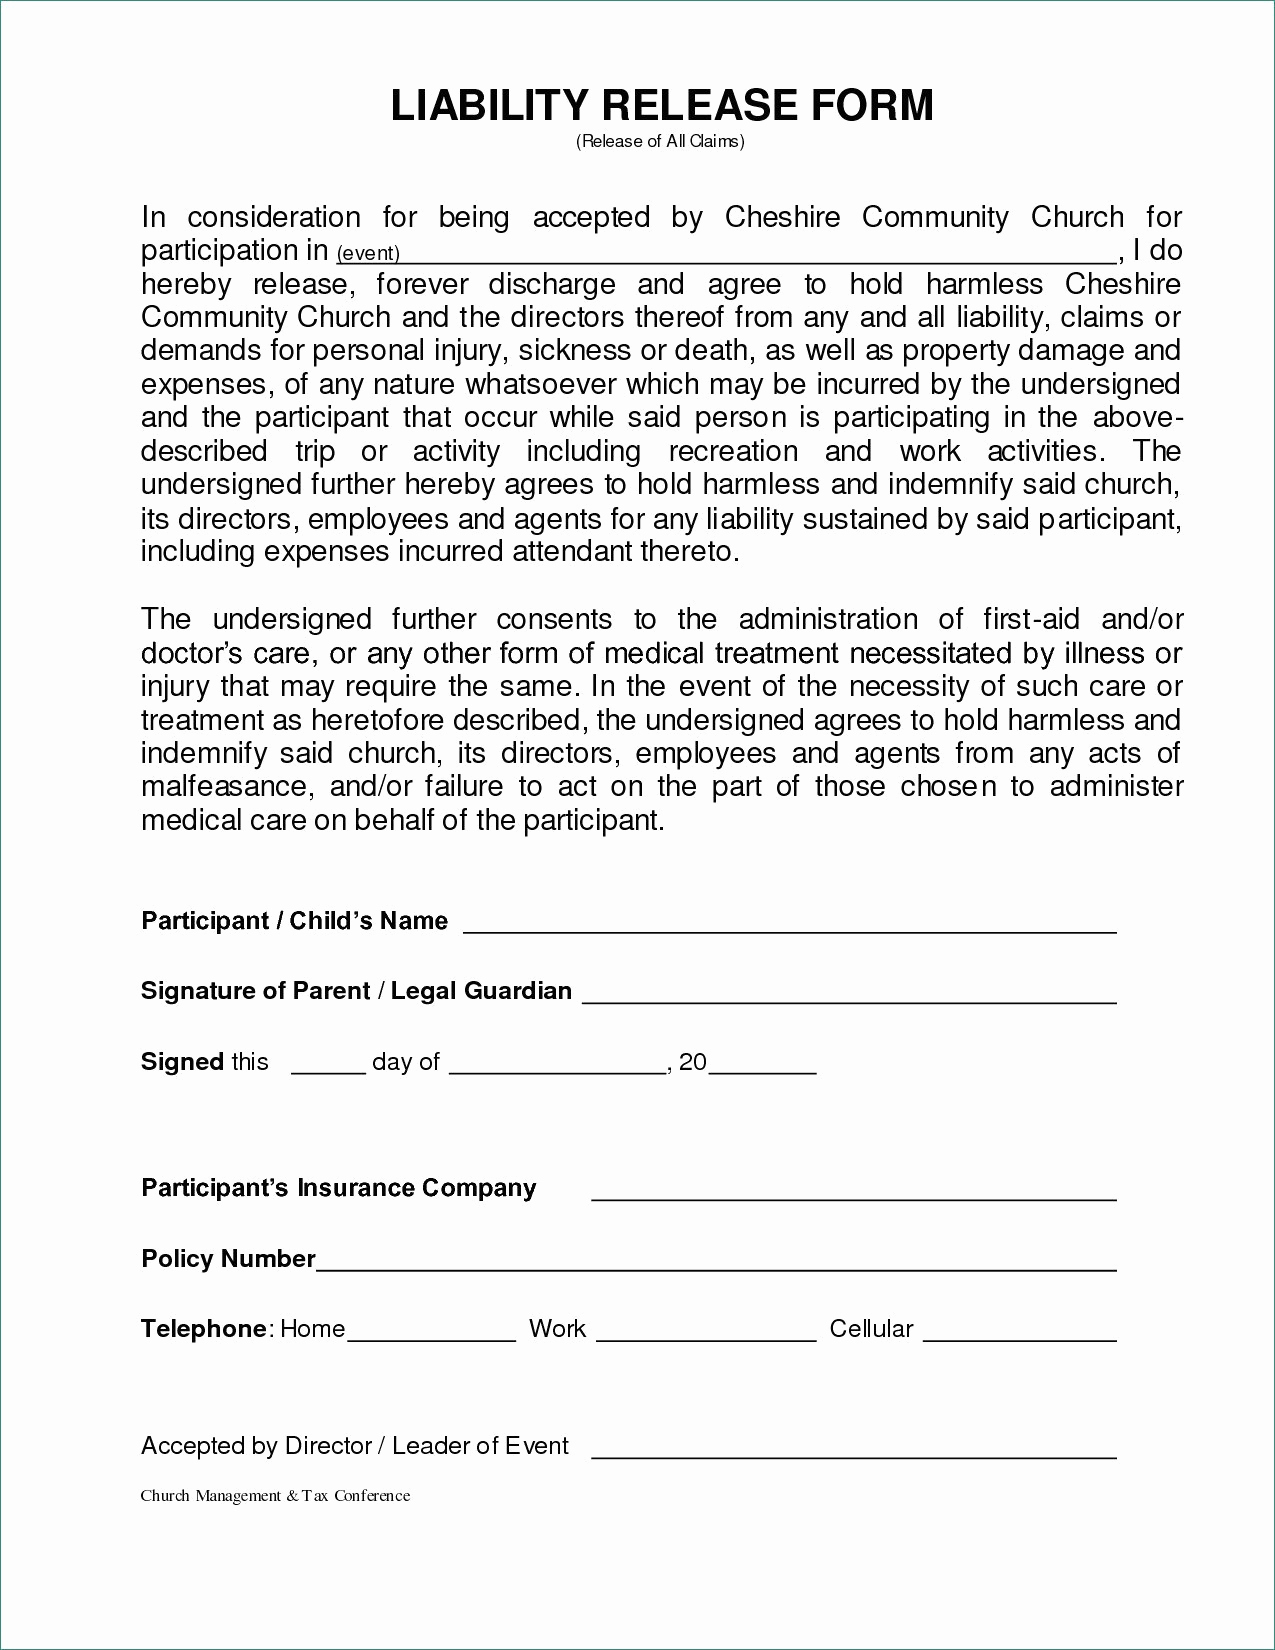 Liability Waiver form Free Lovely General Liability Release form Image – Release Of